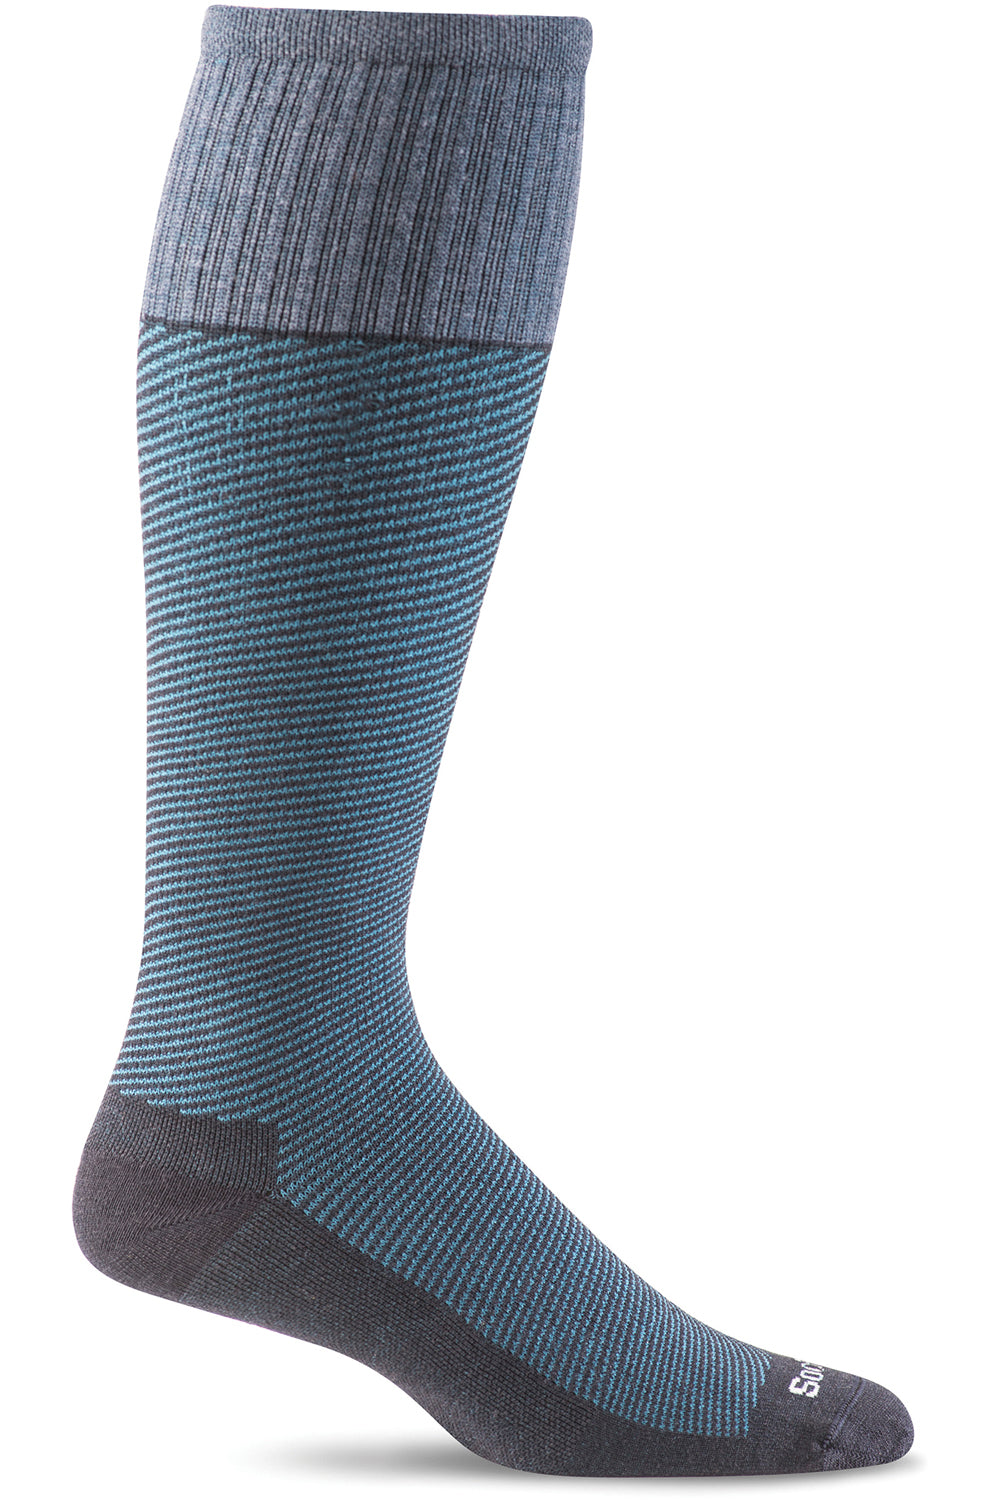 Sockwell Men's Bart Compression Sock in Navy color from the side